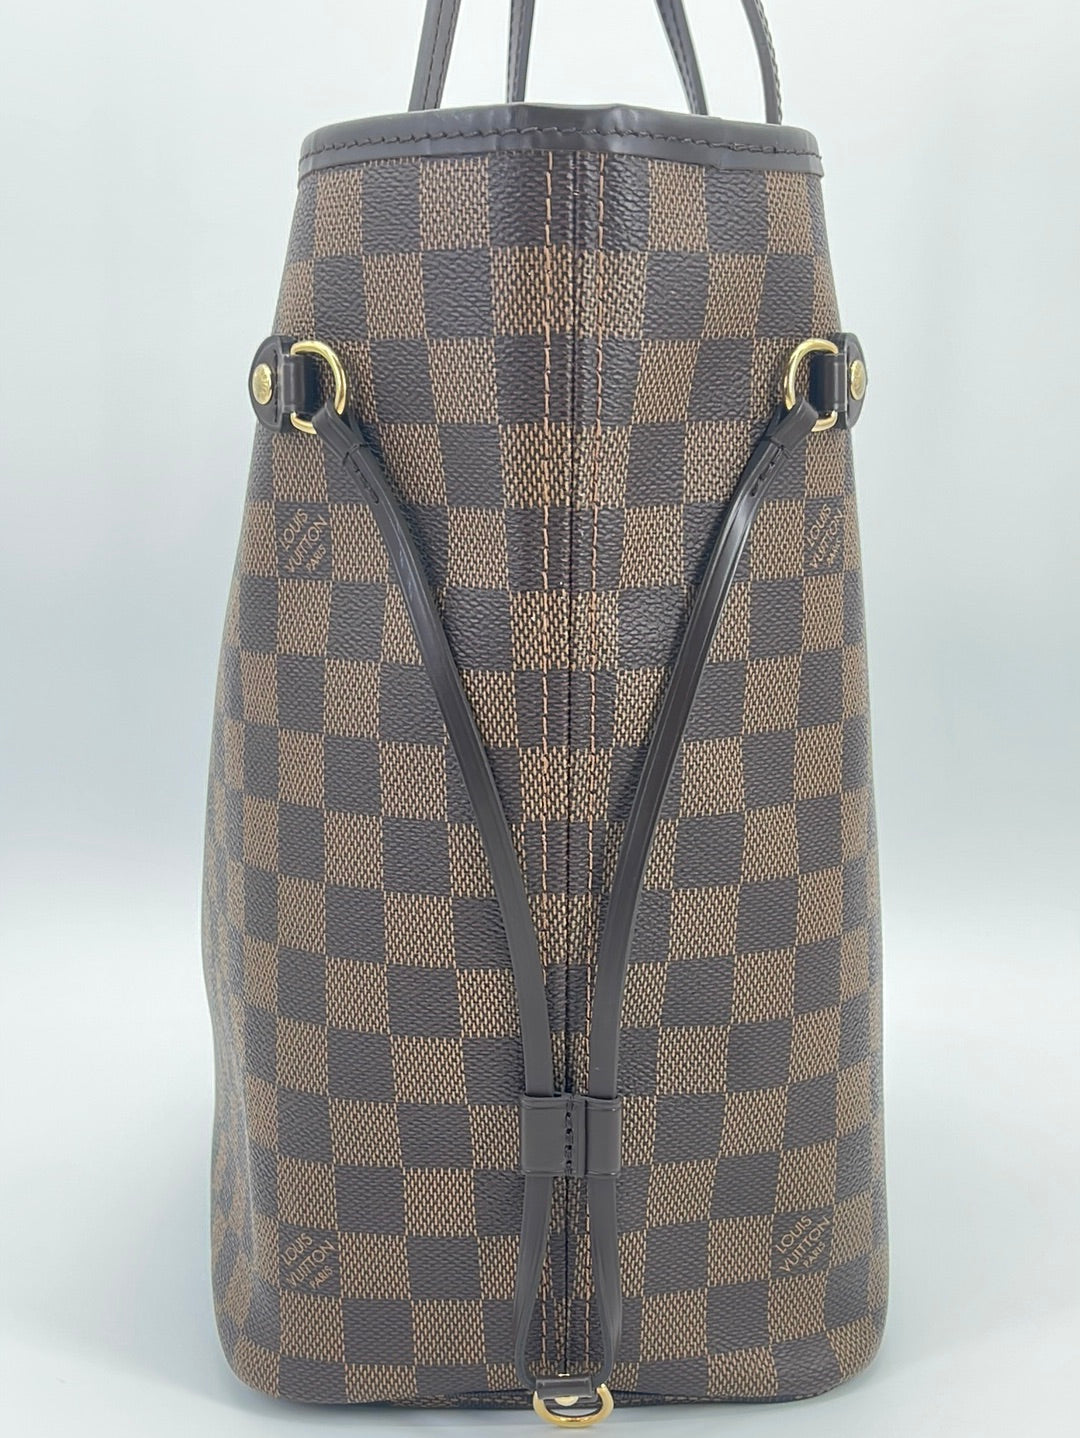 Buy Authentic Pre-owned Louis Vuitton Lv Damier Ebene Alma Hand Tote Bag  Purse N51131 132261 from Japan - Buy authentic Plus exclusive items from  Japan